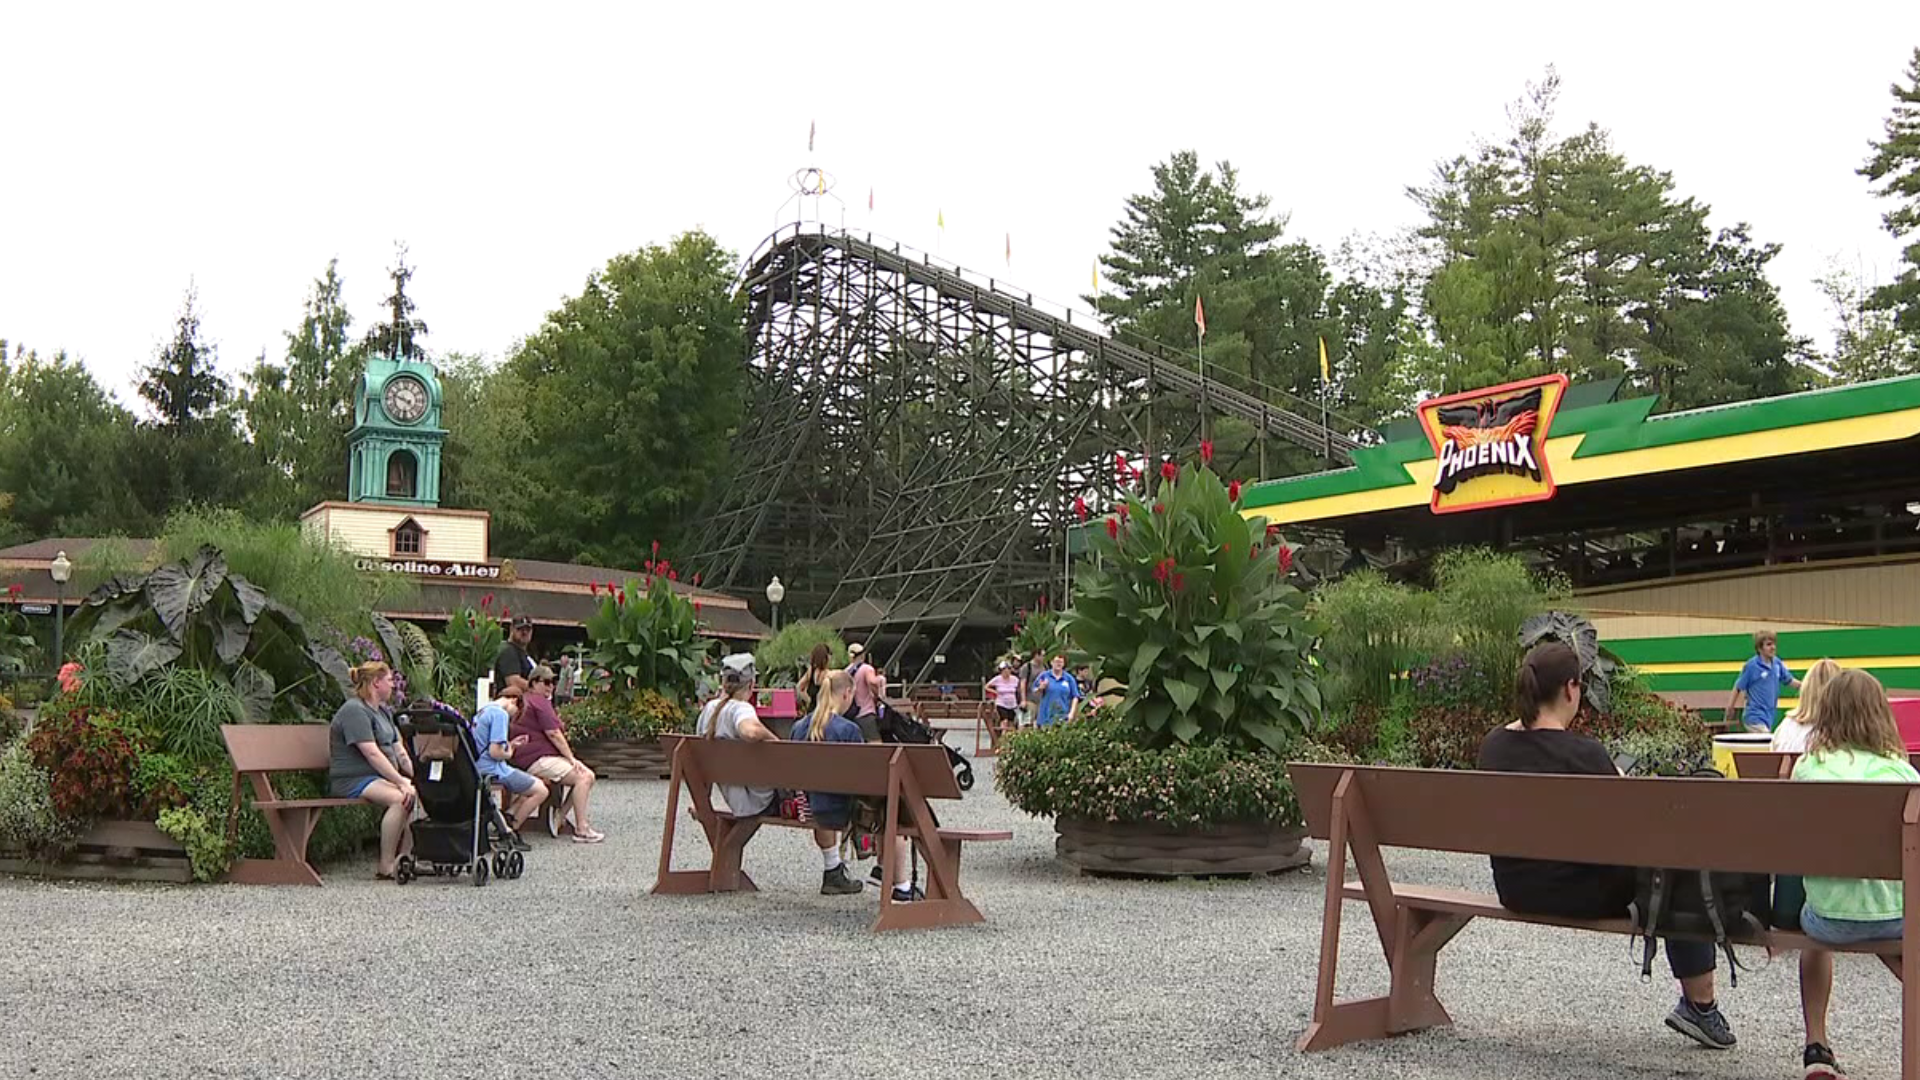 Families are heading out to Knoebels for one of the last summer weekends at the Amusement Resort.